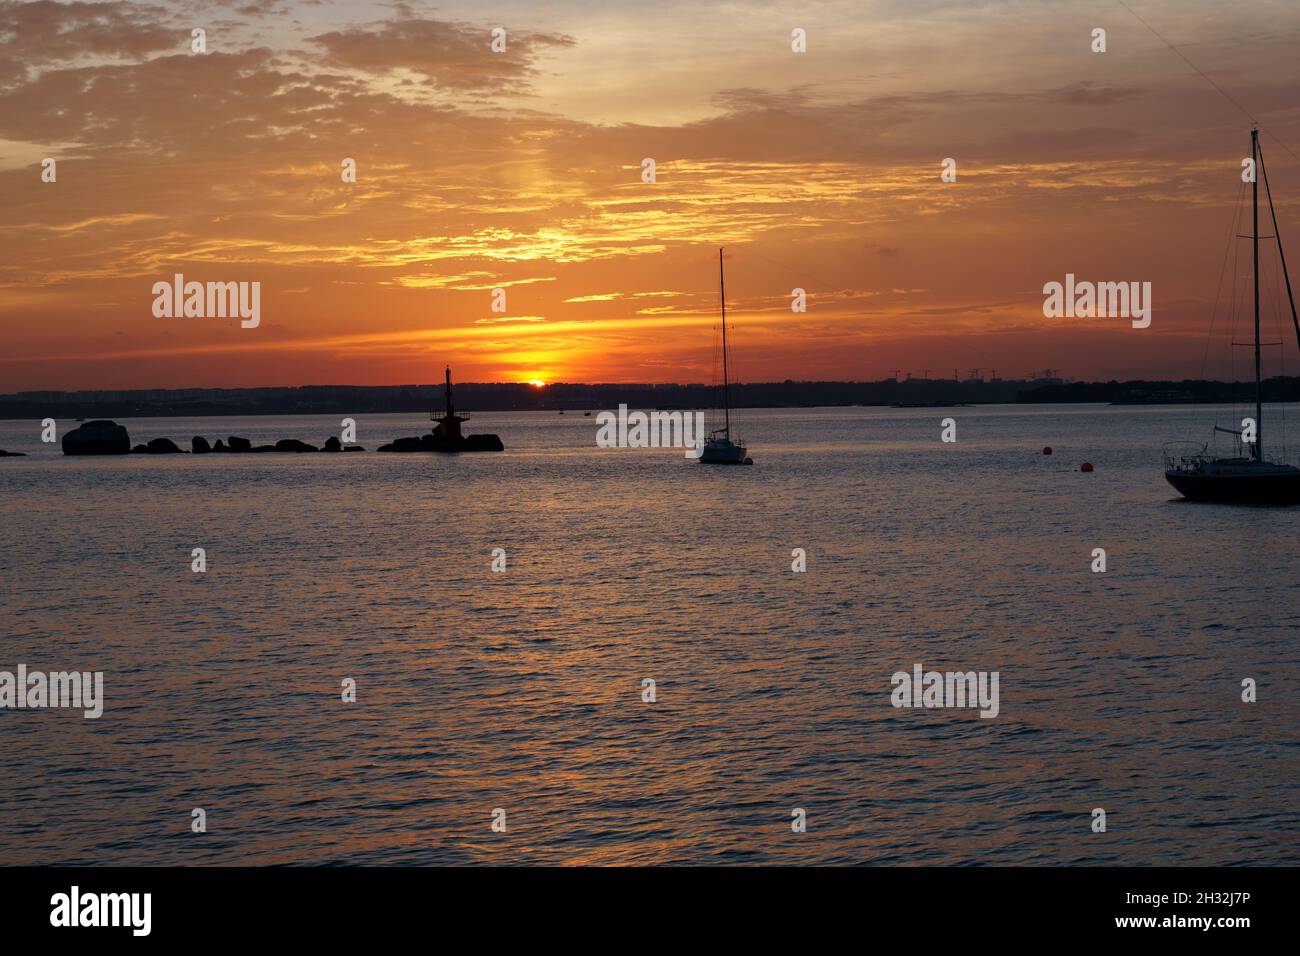 A moment when the sun is setting for the day at Changi beach Stock Photo